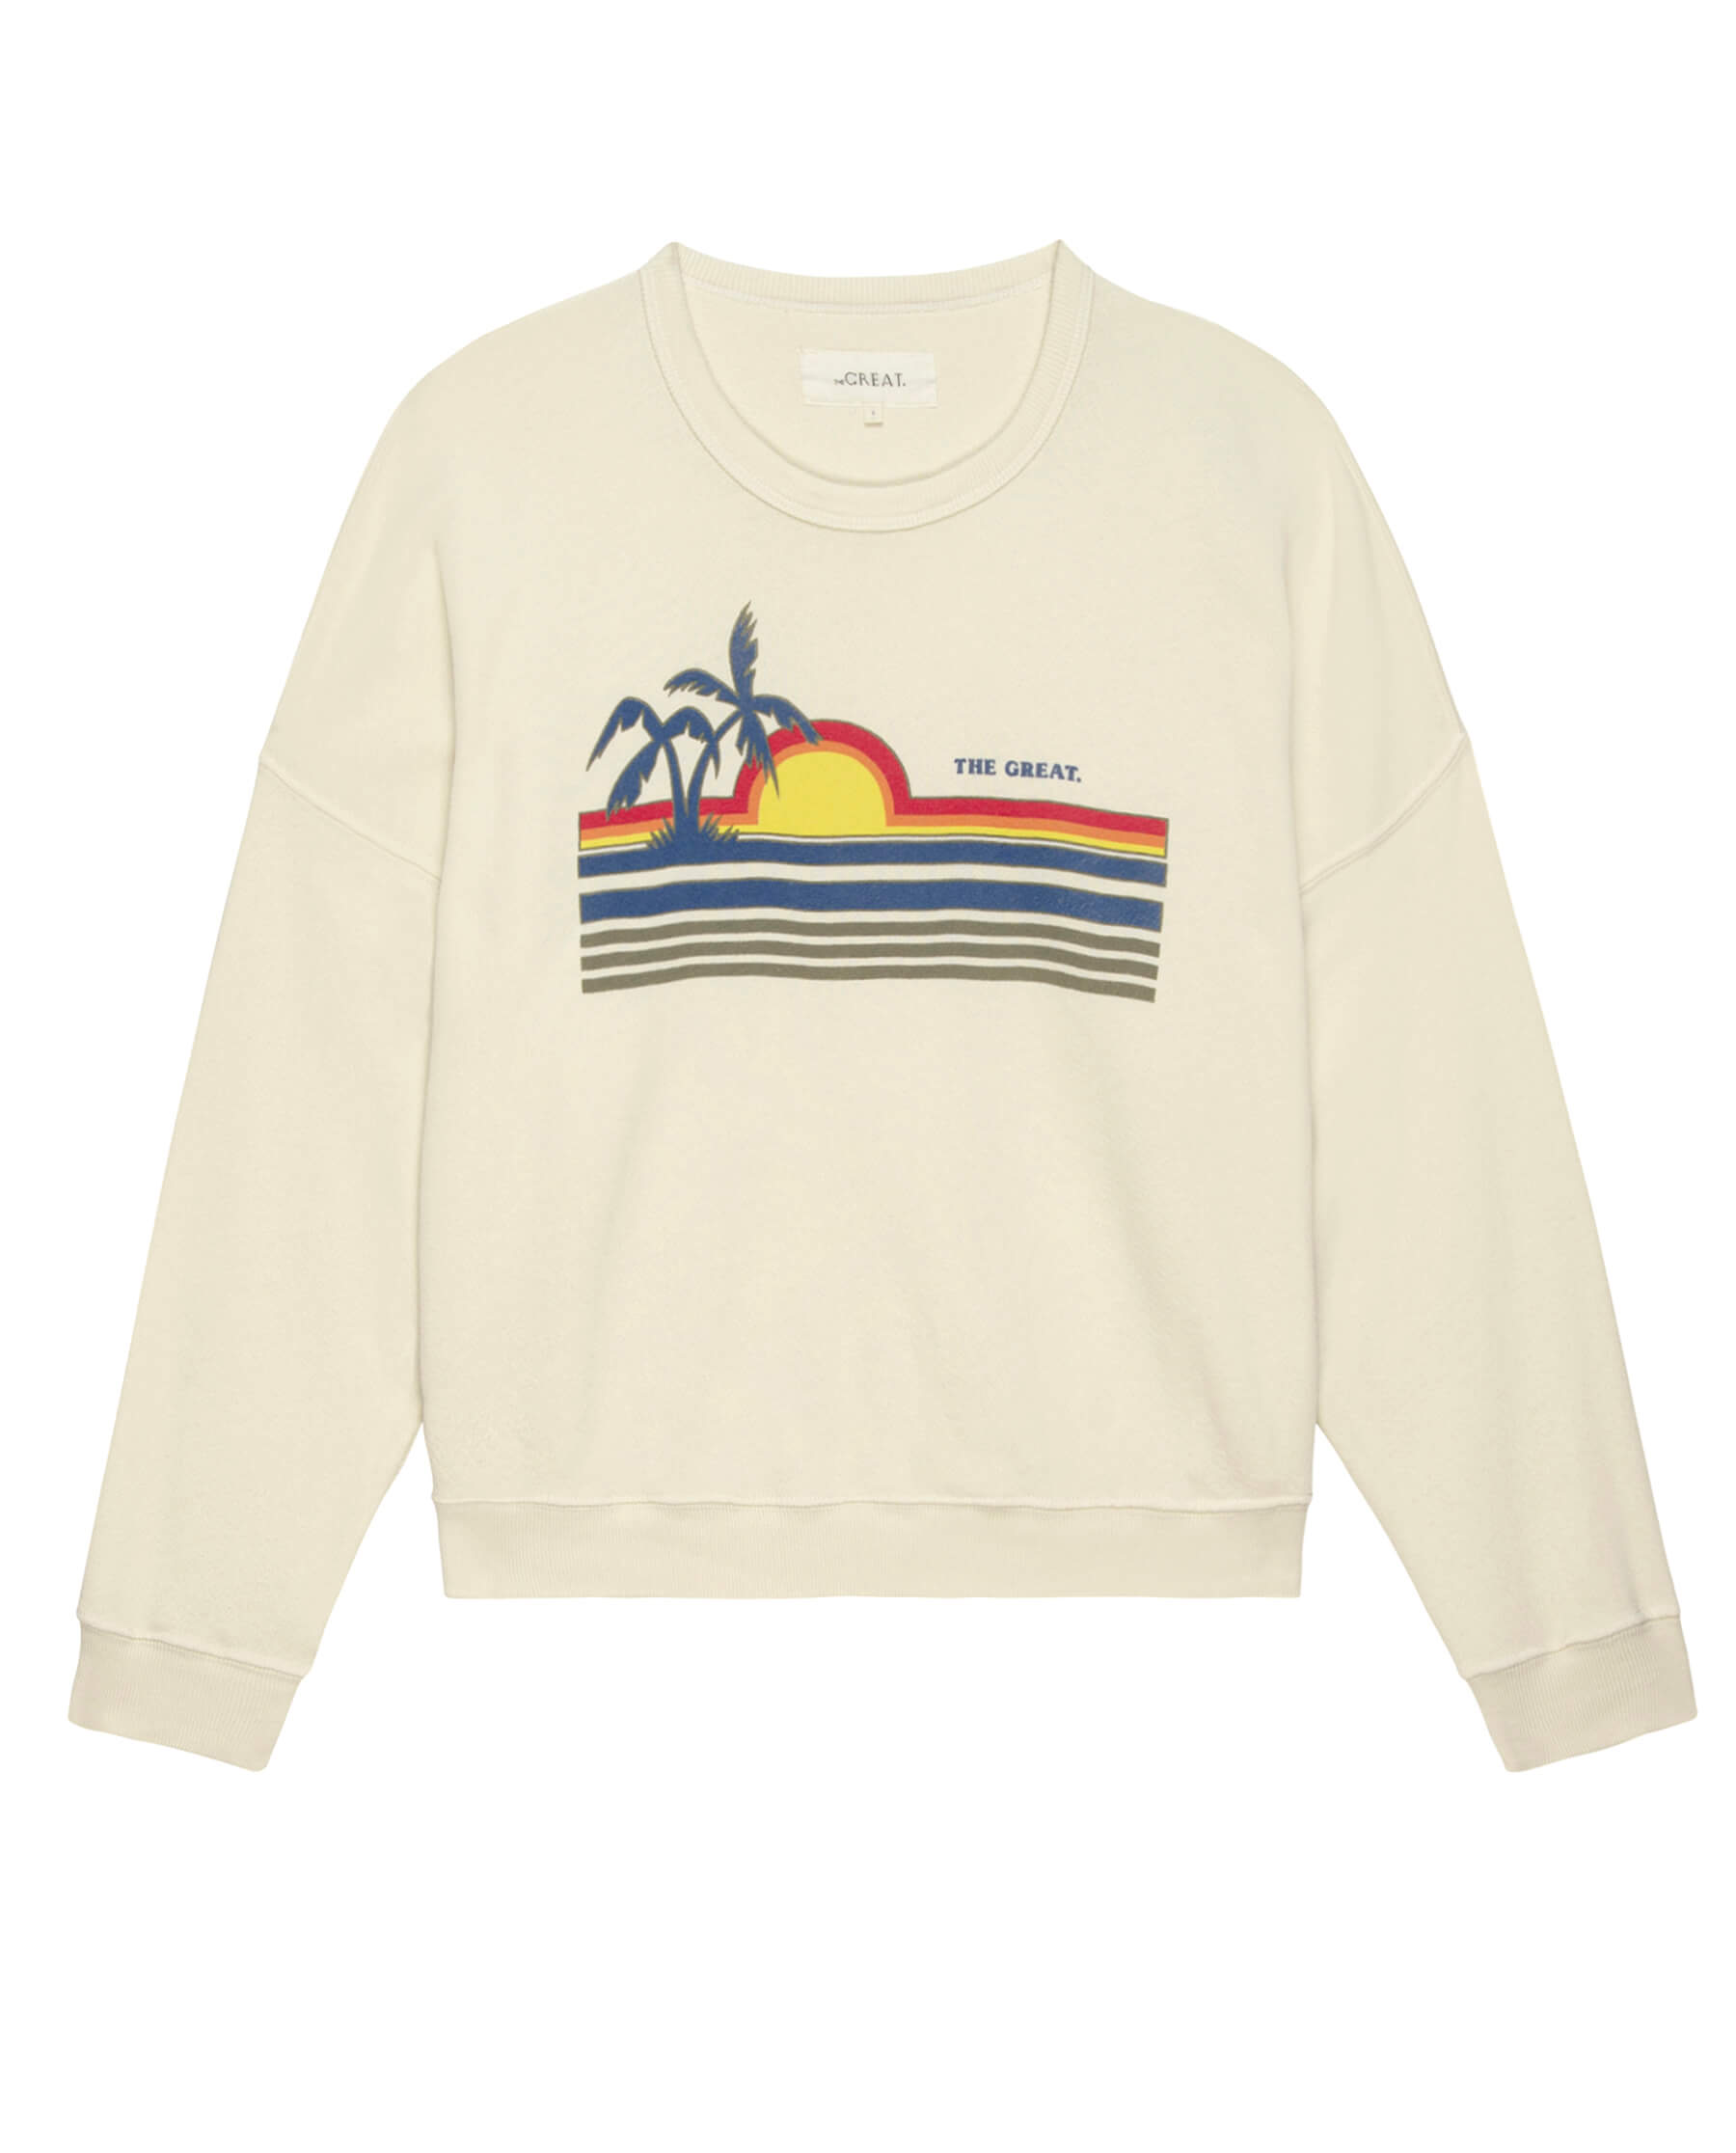 The Teammate Sweatshirt. Graphic -- Washed White with Sunset Graphic SWEATSHIRTS THE GREAT. SU24